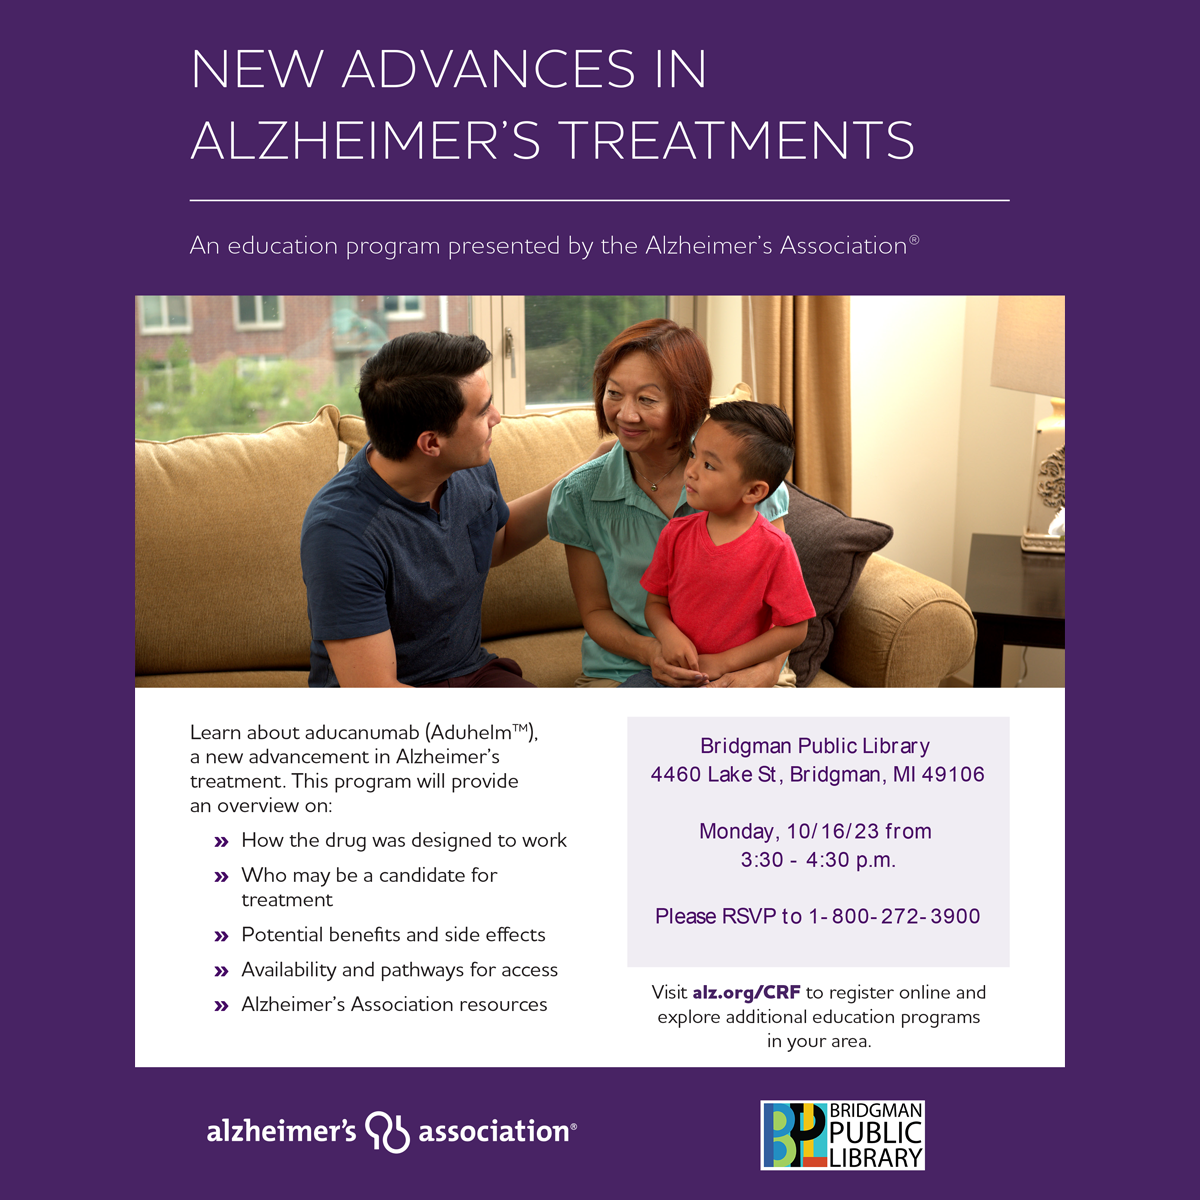 New Advances in Alzheimer's Treatments on Monday, October 16th, 3:30pm.